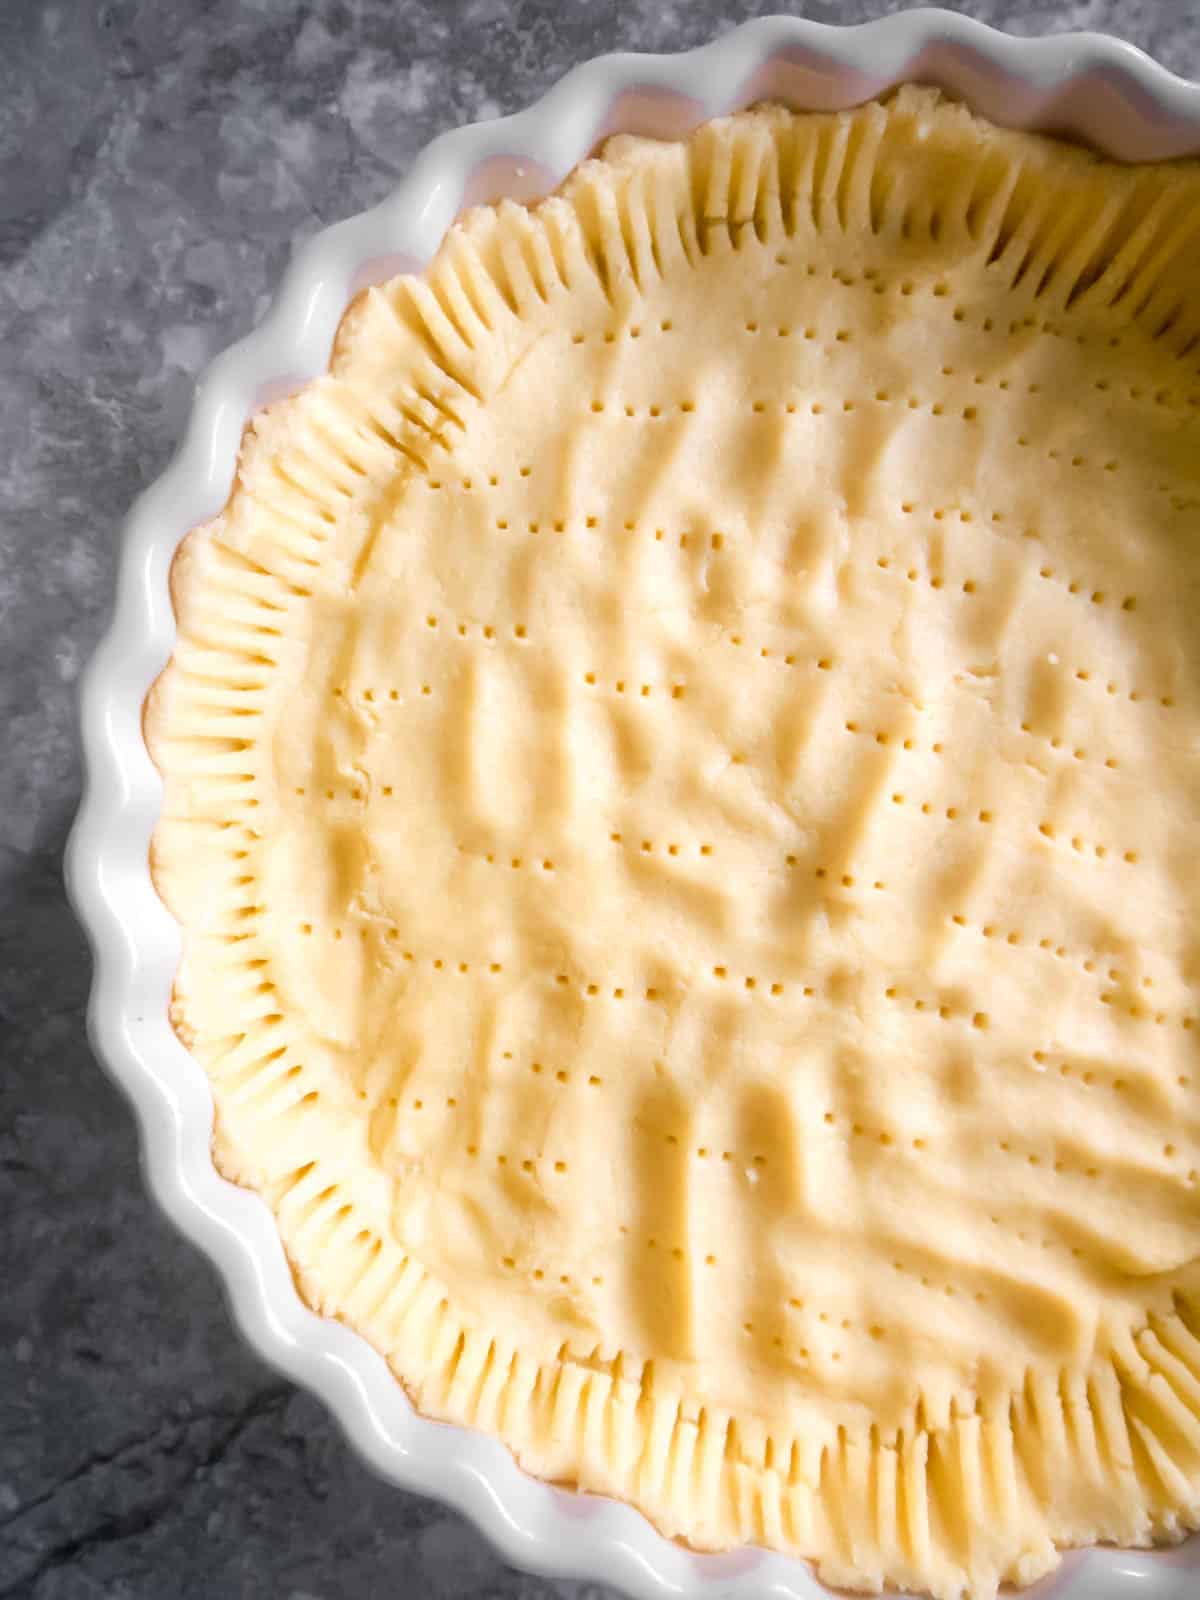 Raw dough spread out in tart pan.